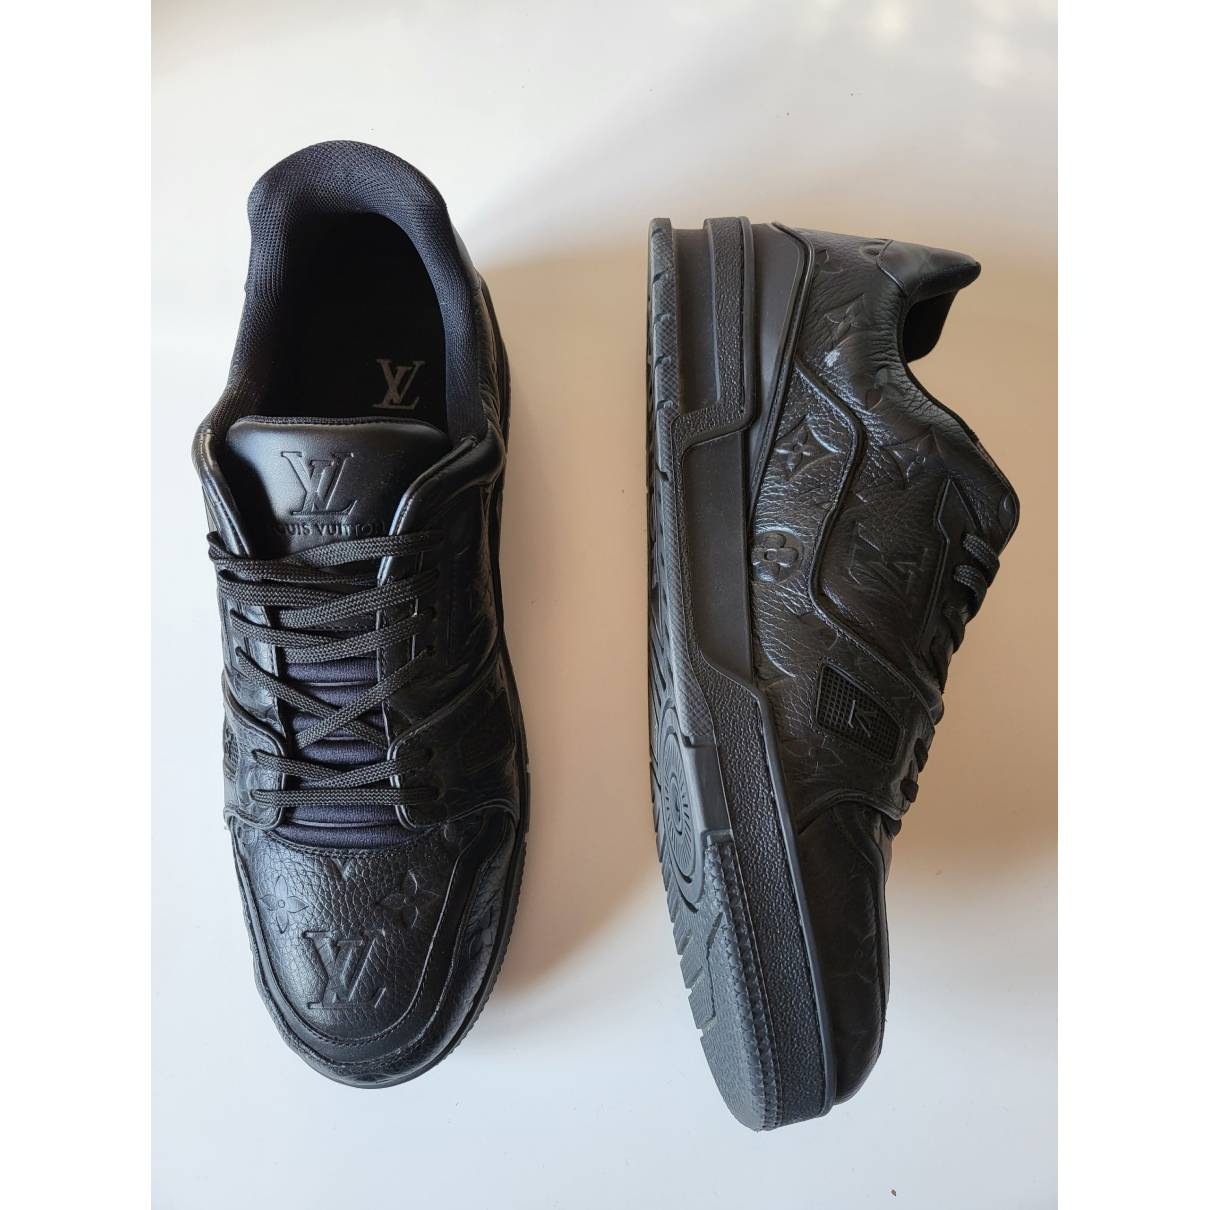 Lv trainer low trainers Louis Vuitton Black size 44 EU in Suede - 34229640